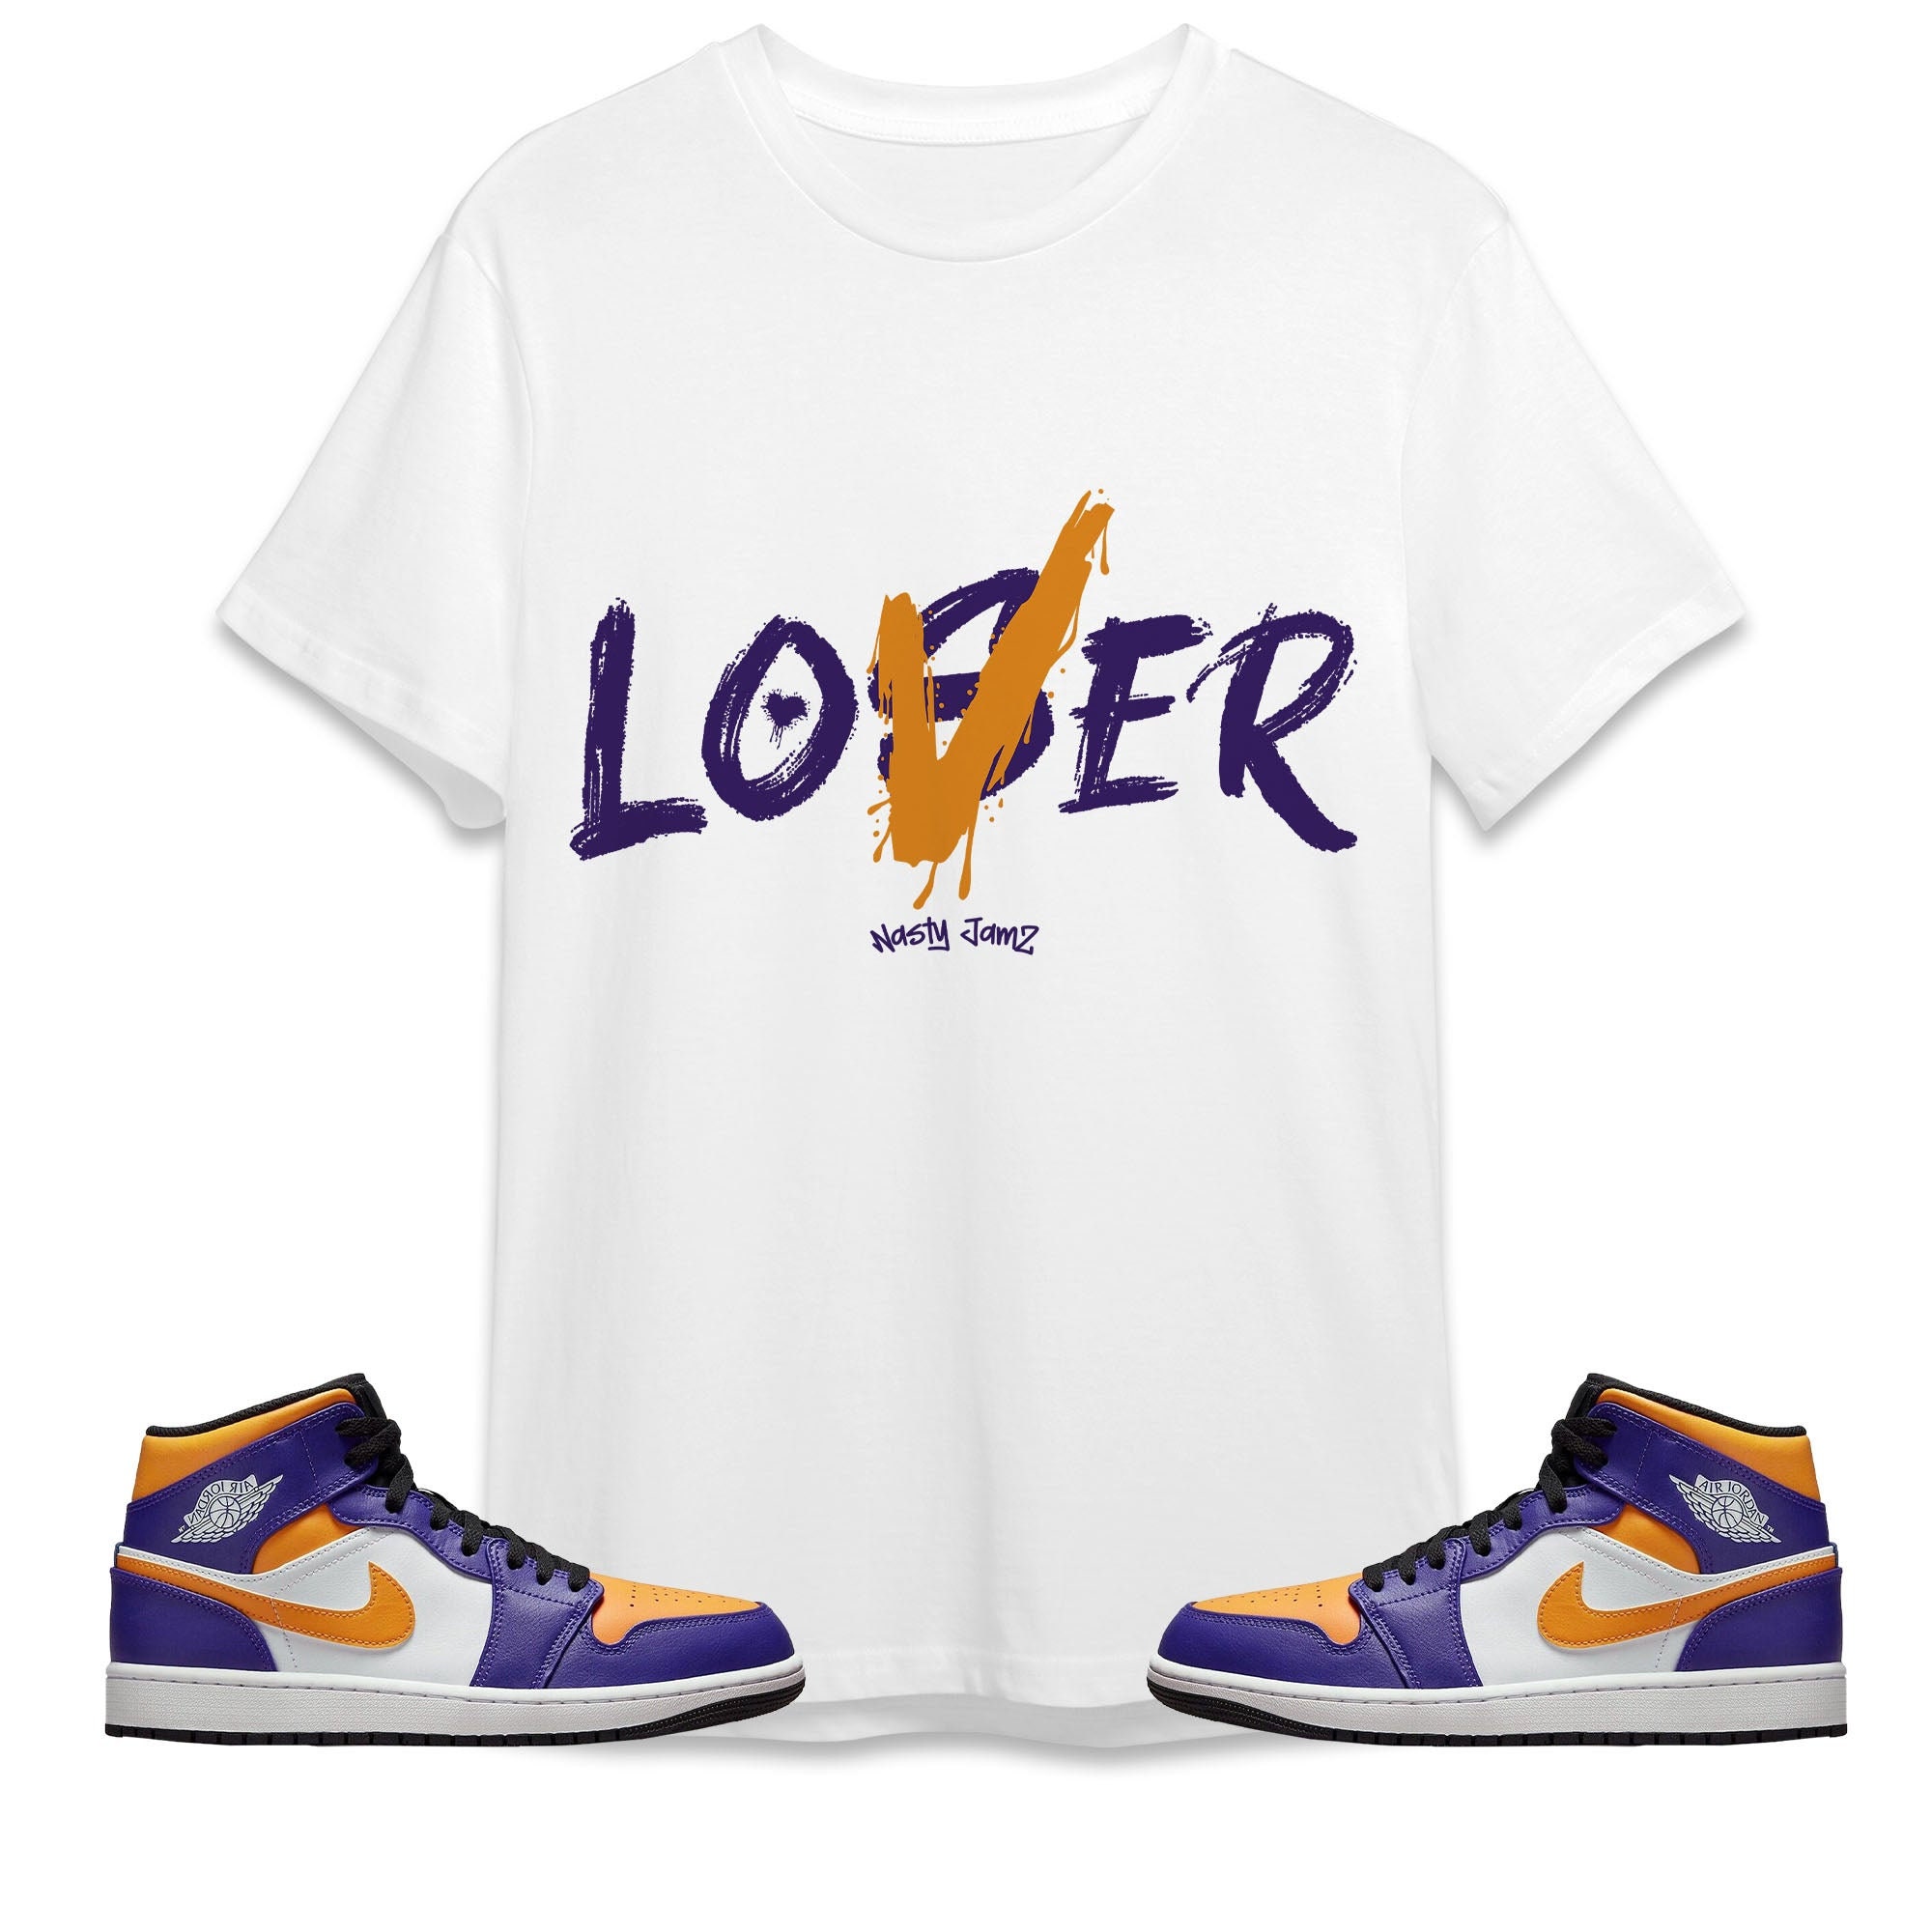 Custom Air Force 1 Mid – “L.A Lakers #8 #24” – Cold Society